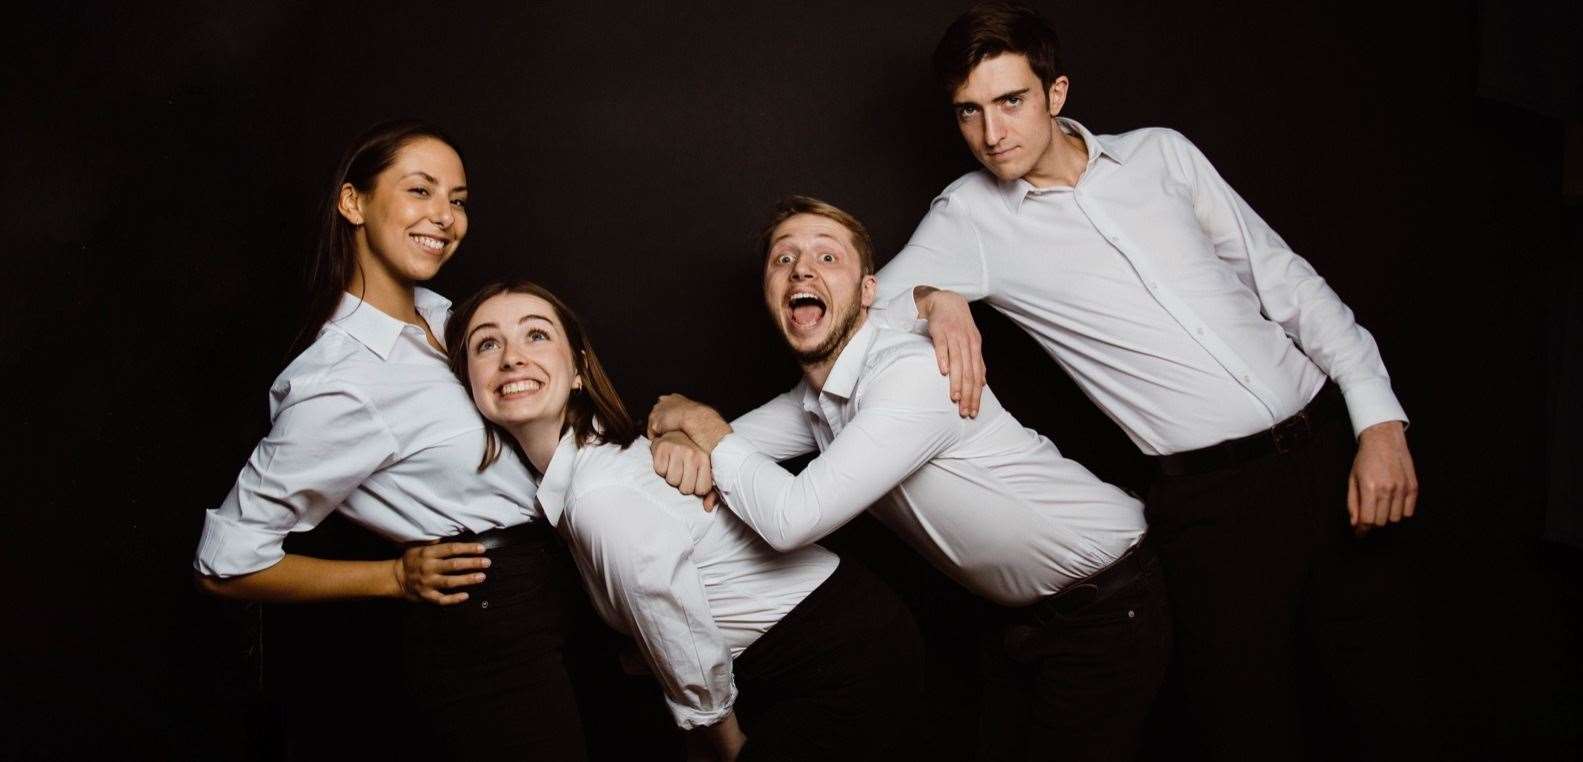 Theatre company Get Out Of My Space will push back the start of it festive performance